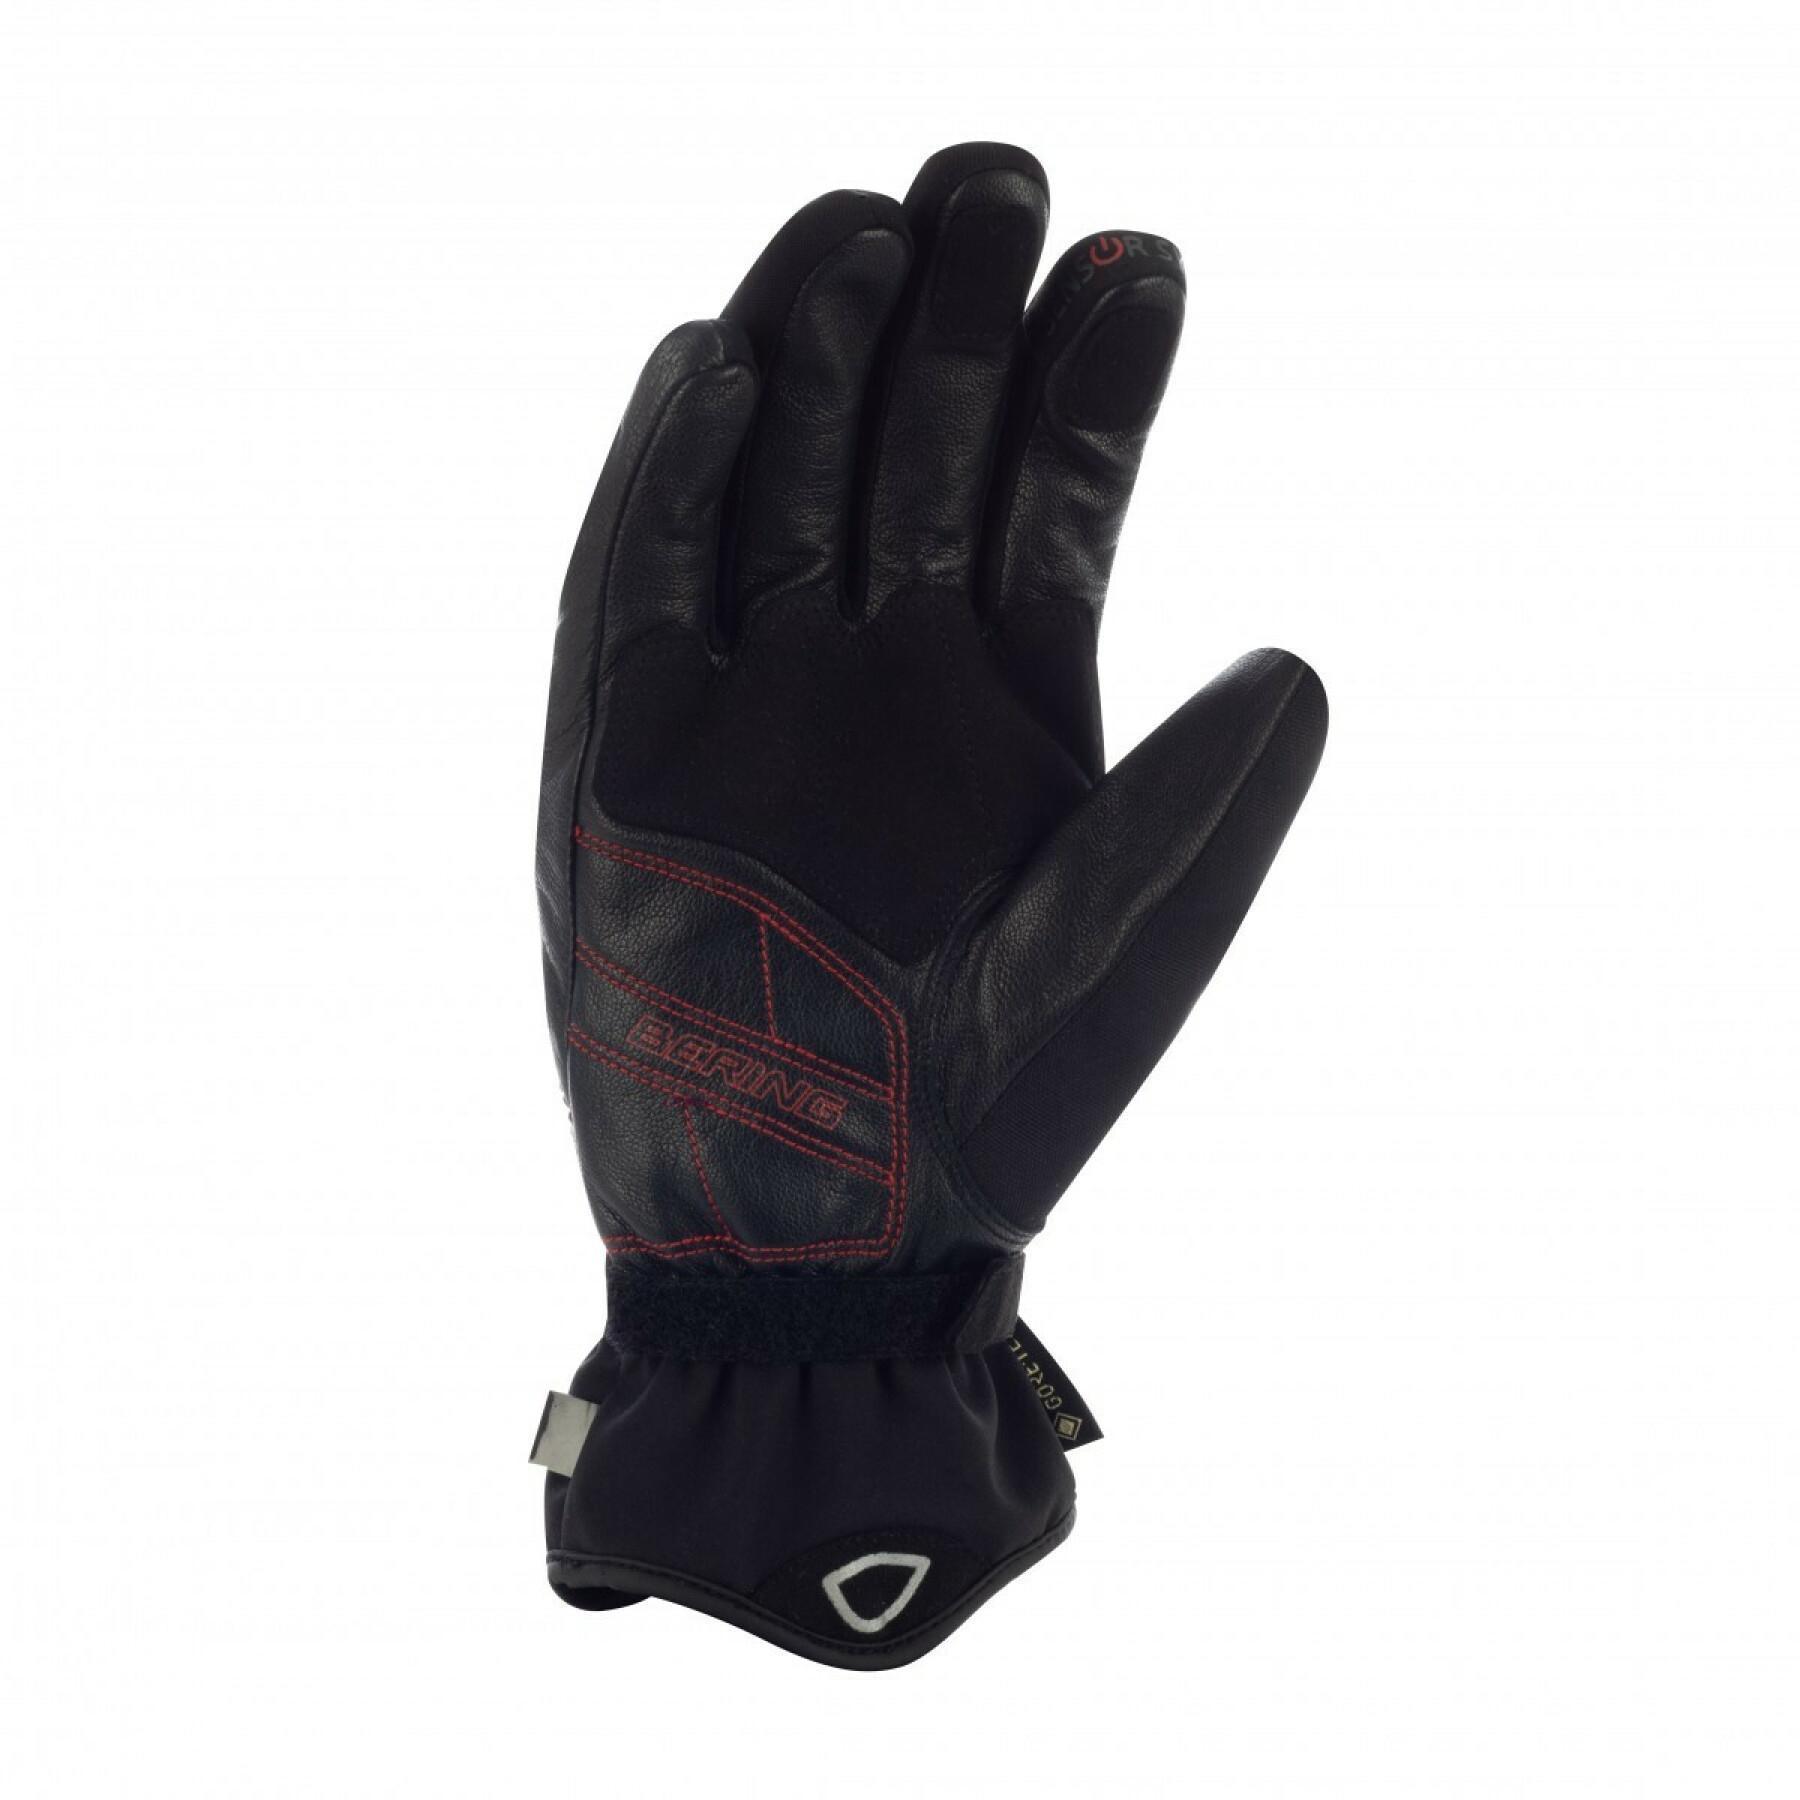 Winter motorcycle gloves Bering Punch GTX